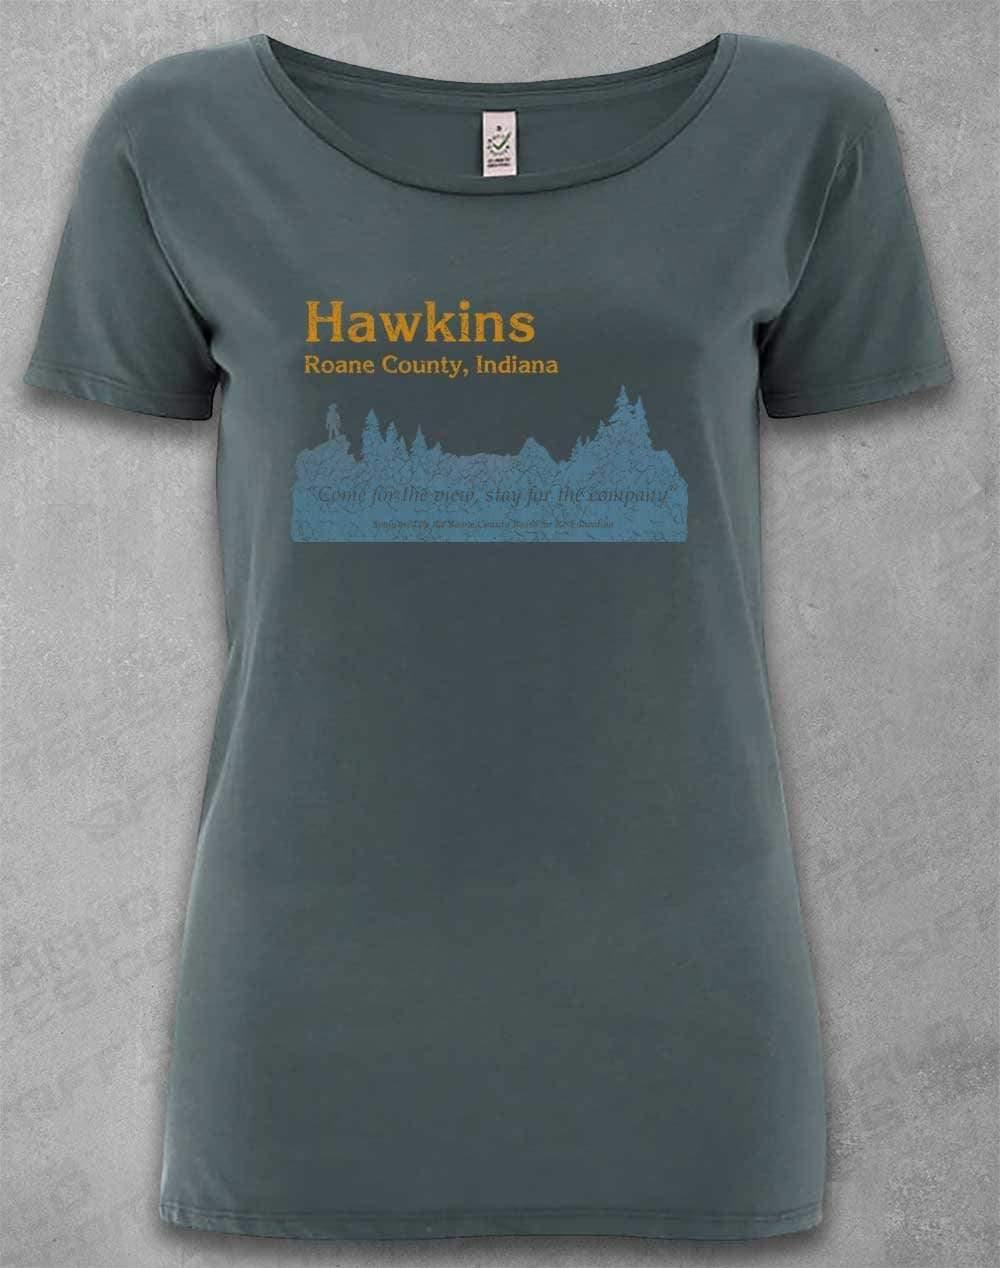 DELUXE Hawkins Roane County Retro Organic Scoop Neck T-Shirt 8-10 / Light Charcoal  - Off World Tees